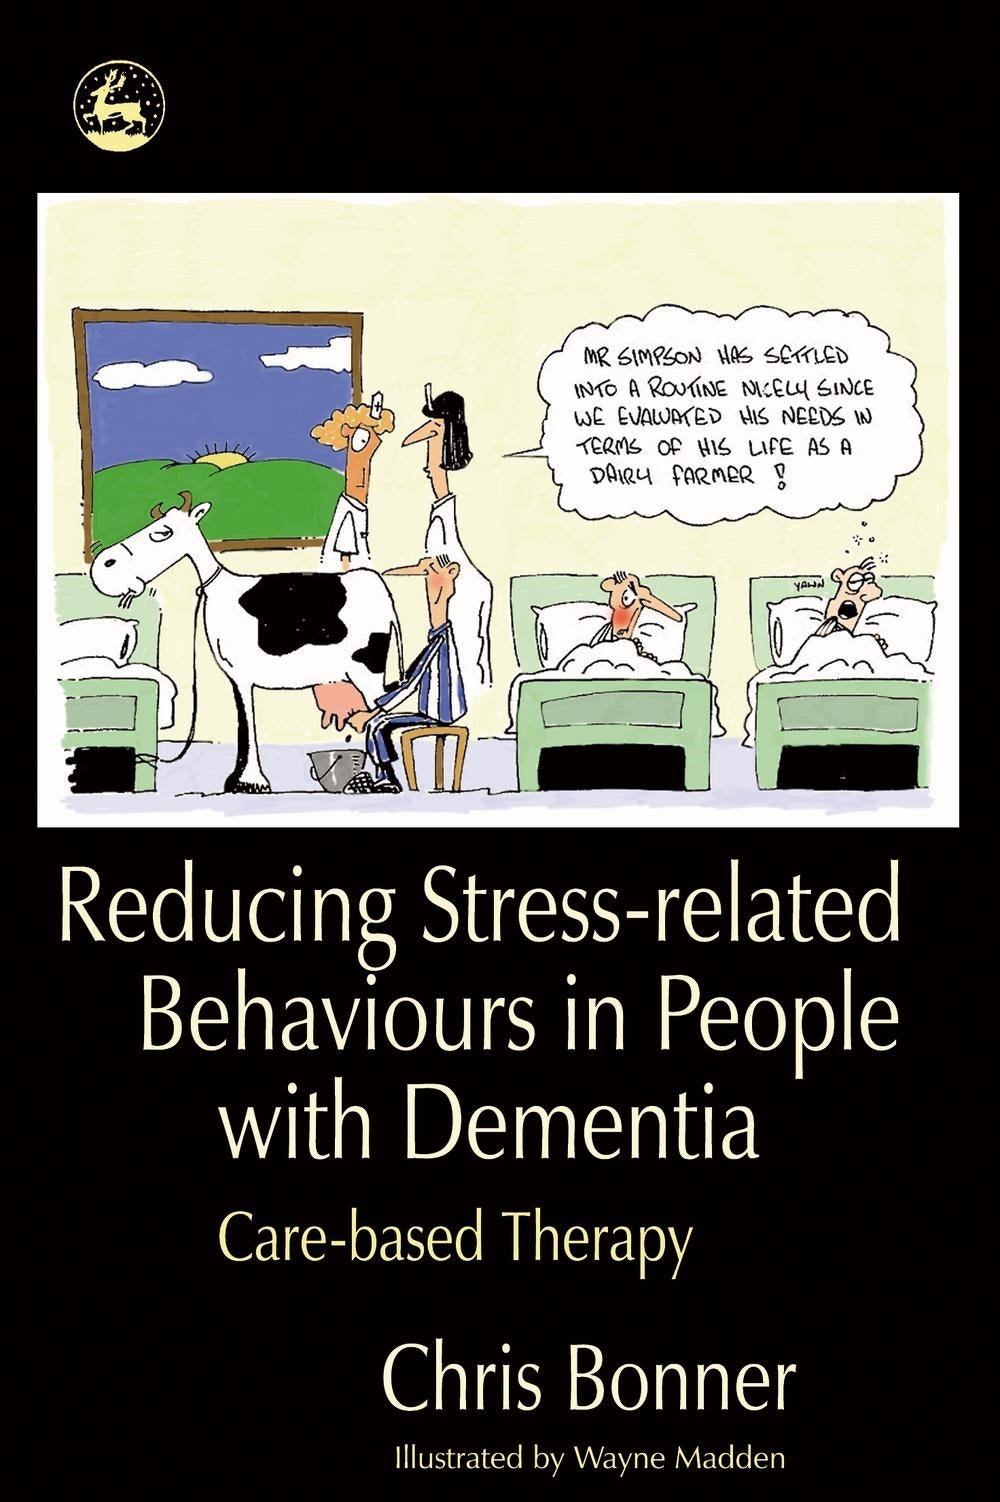 Reducing Stress-related Behaviours in People with Dementia by Chris Bonner